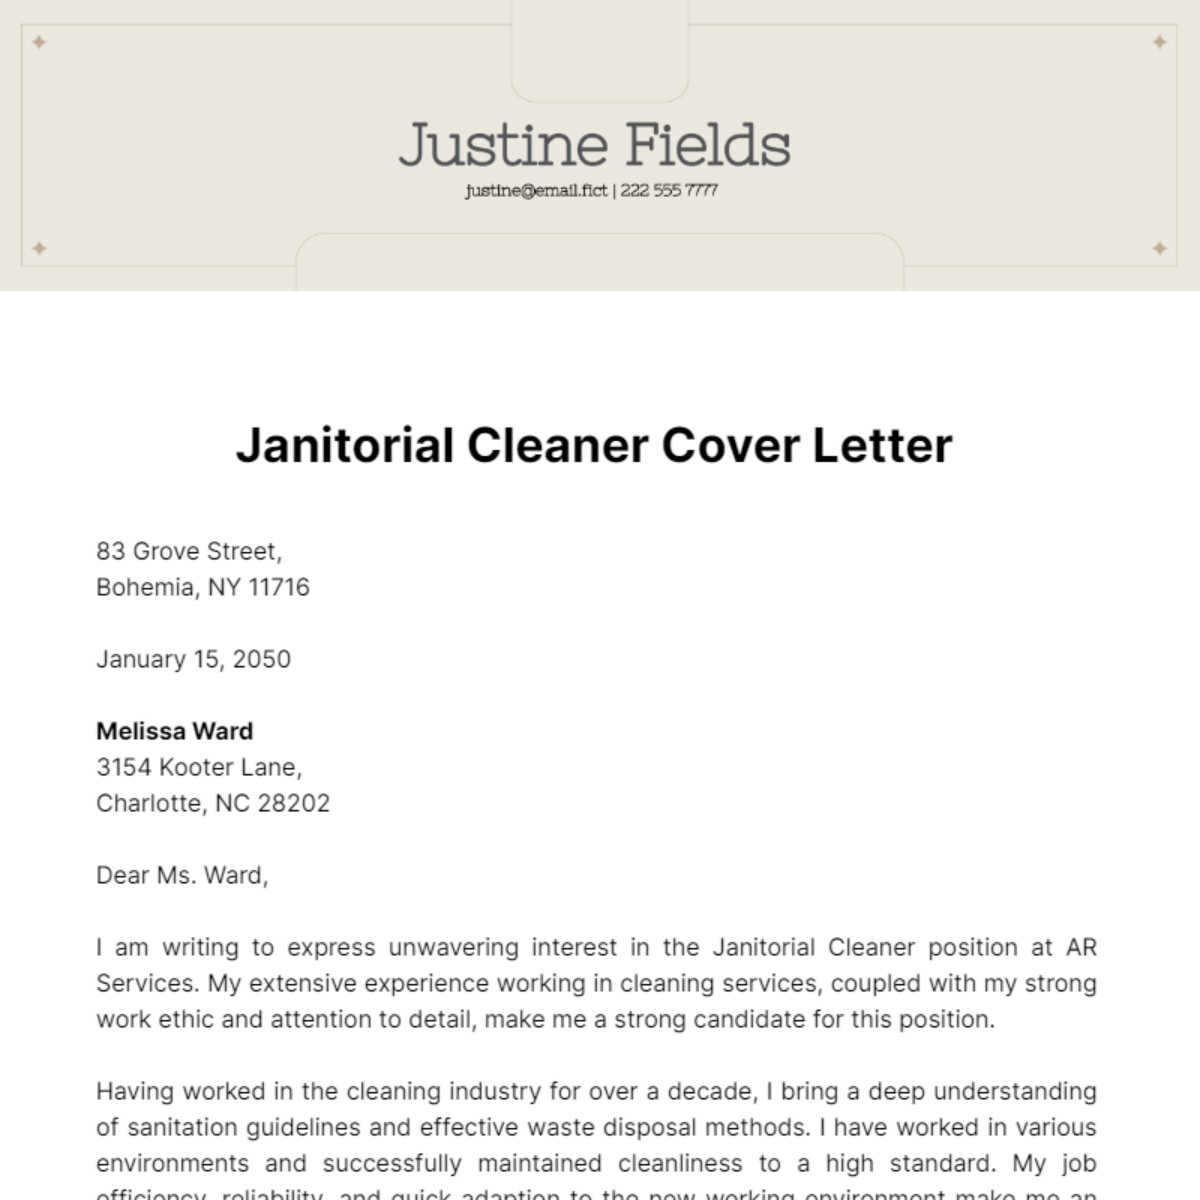 Janitorial Cleaner Cover Letter Template